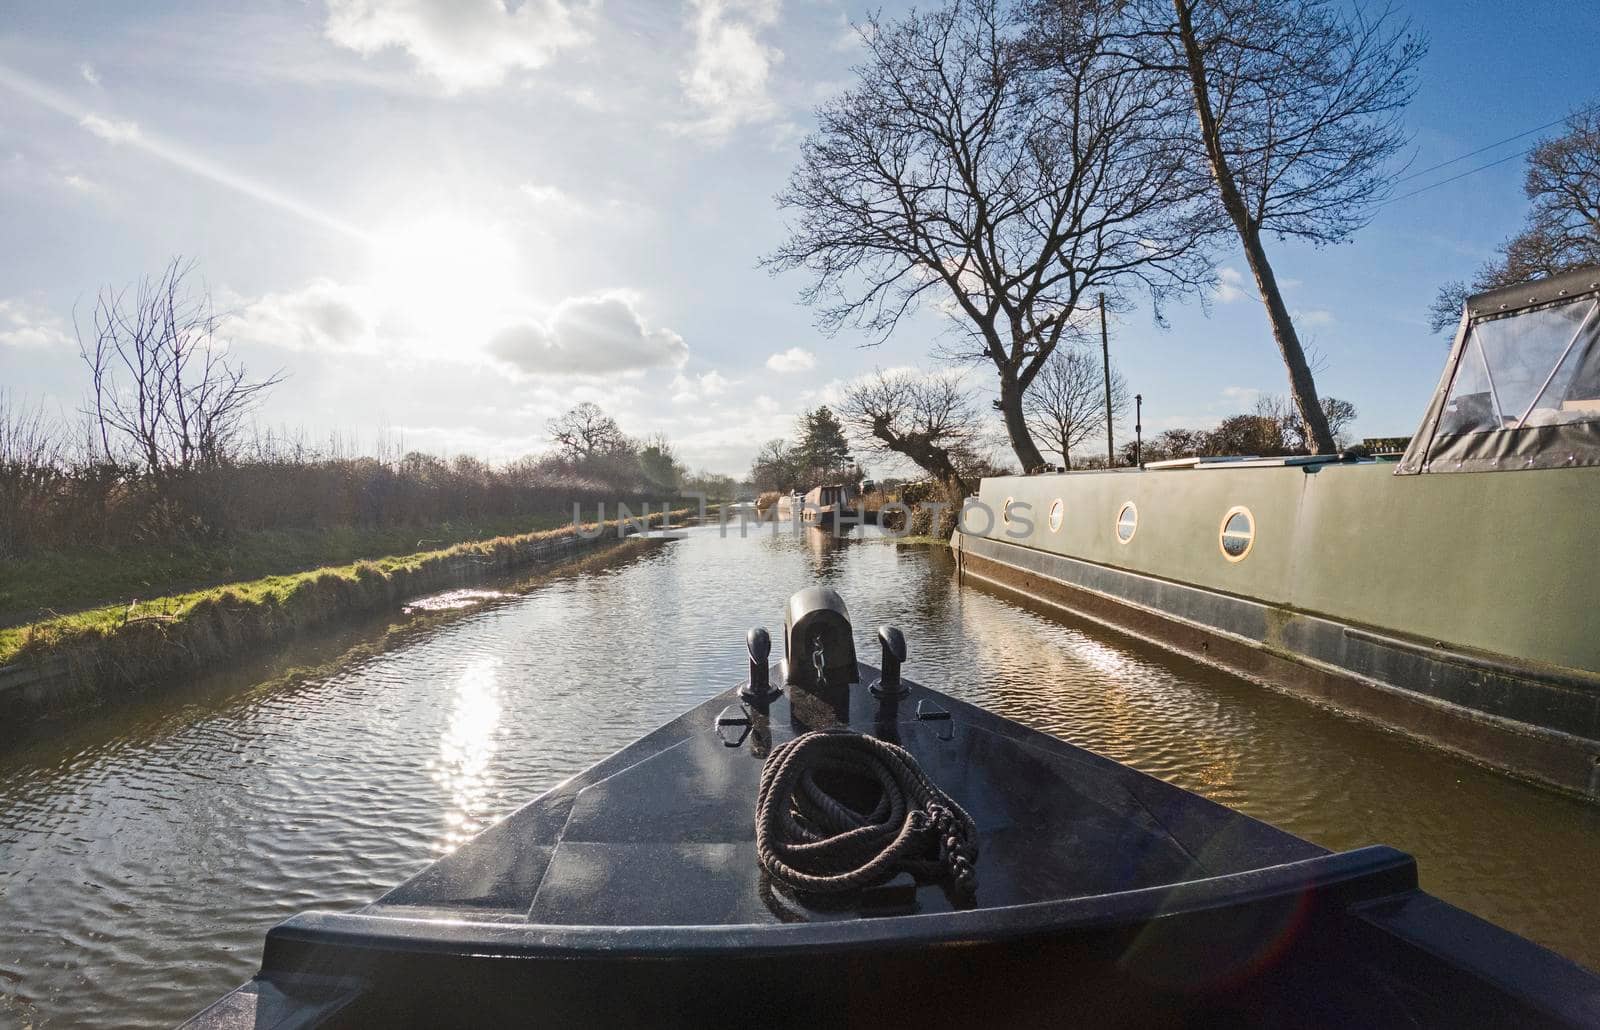 View from the bow of boat with narrowboats moored up in English rural countryside scenery on British tree lined waterway canal